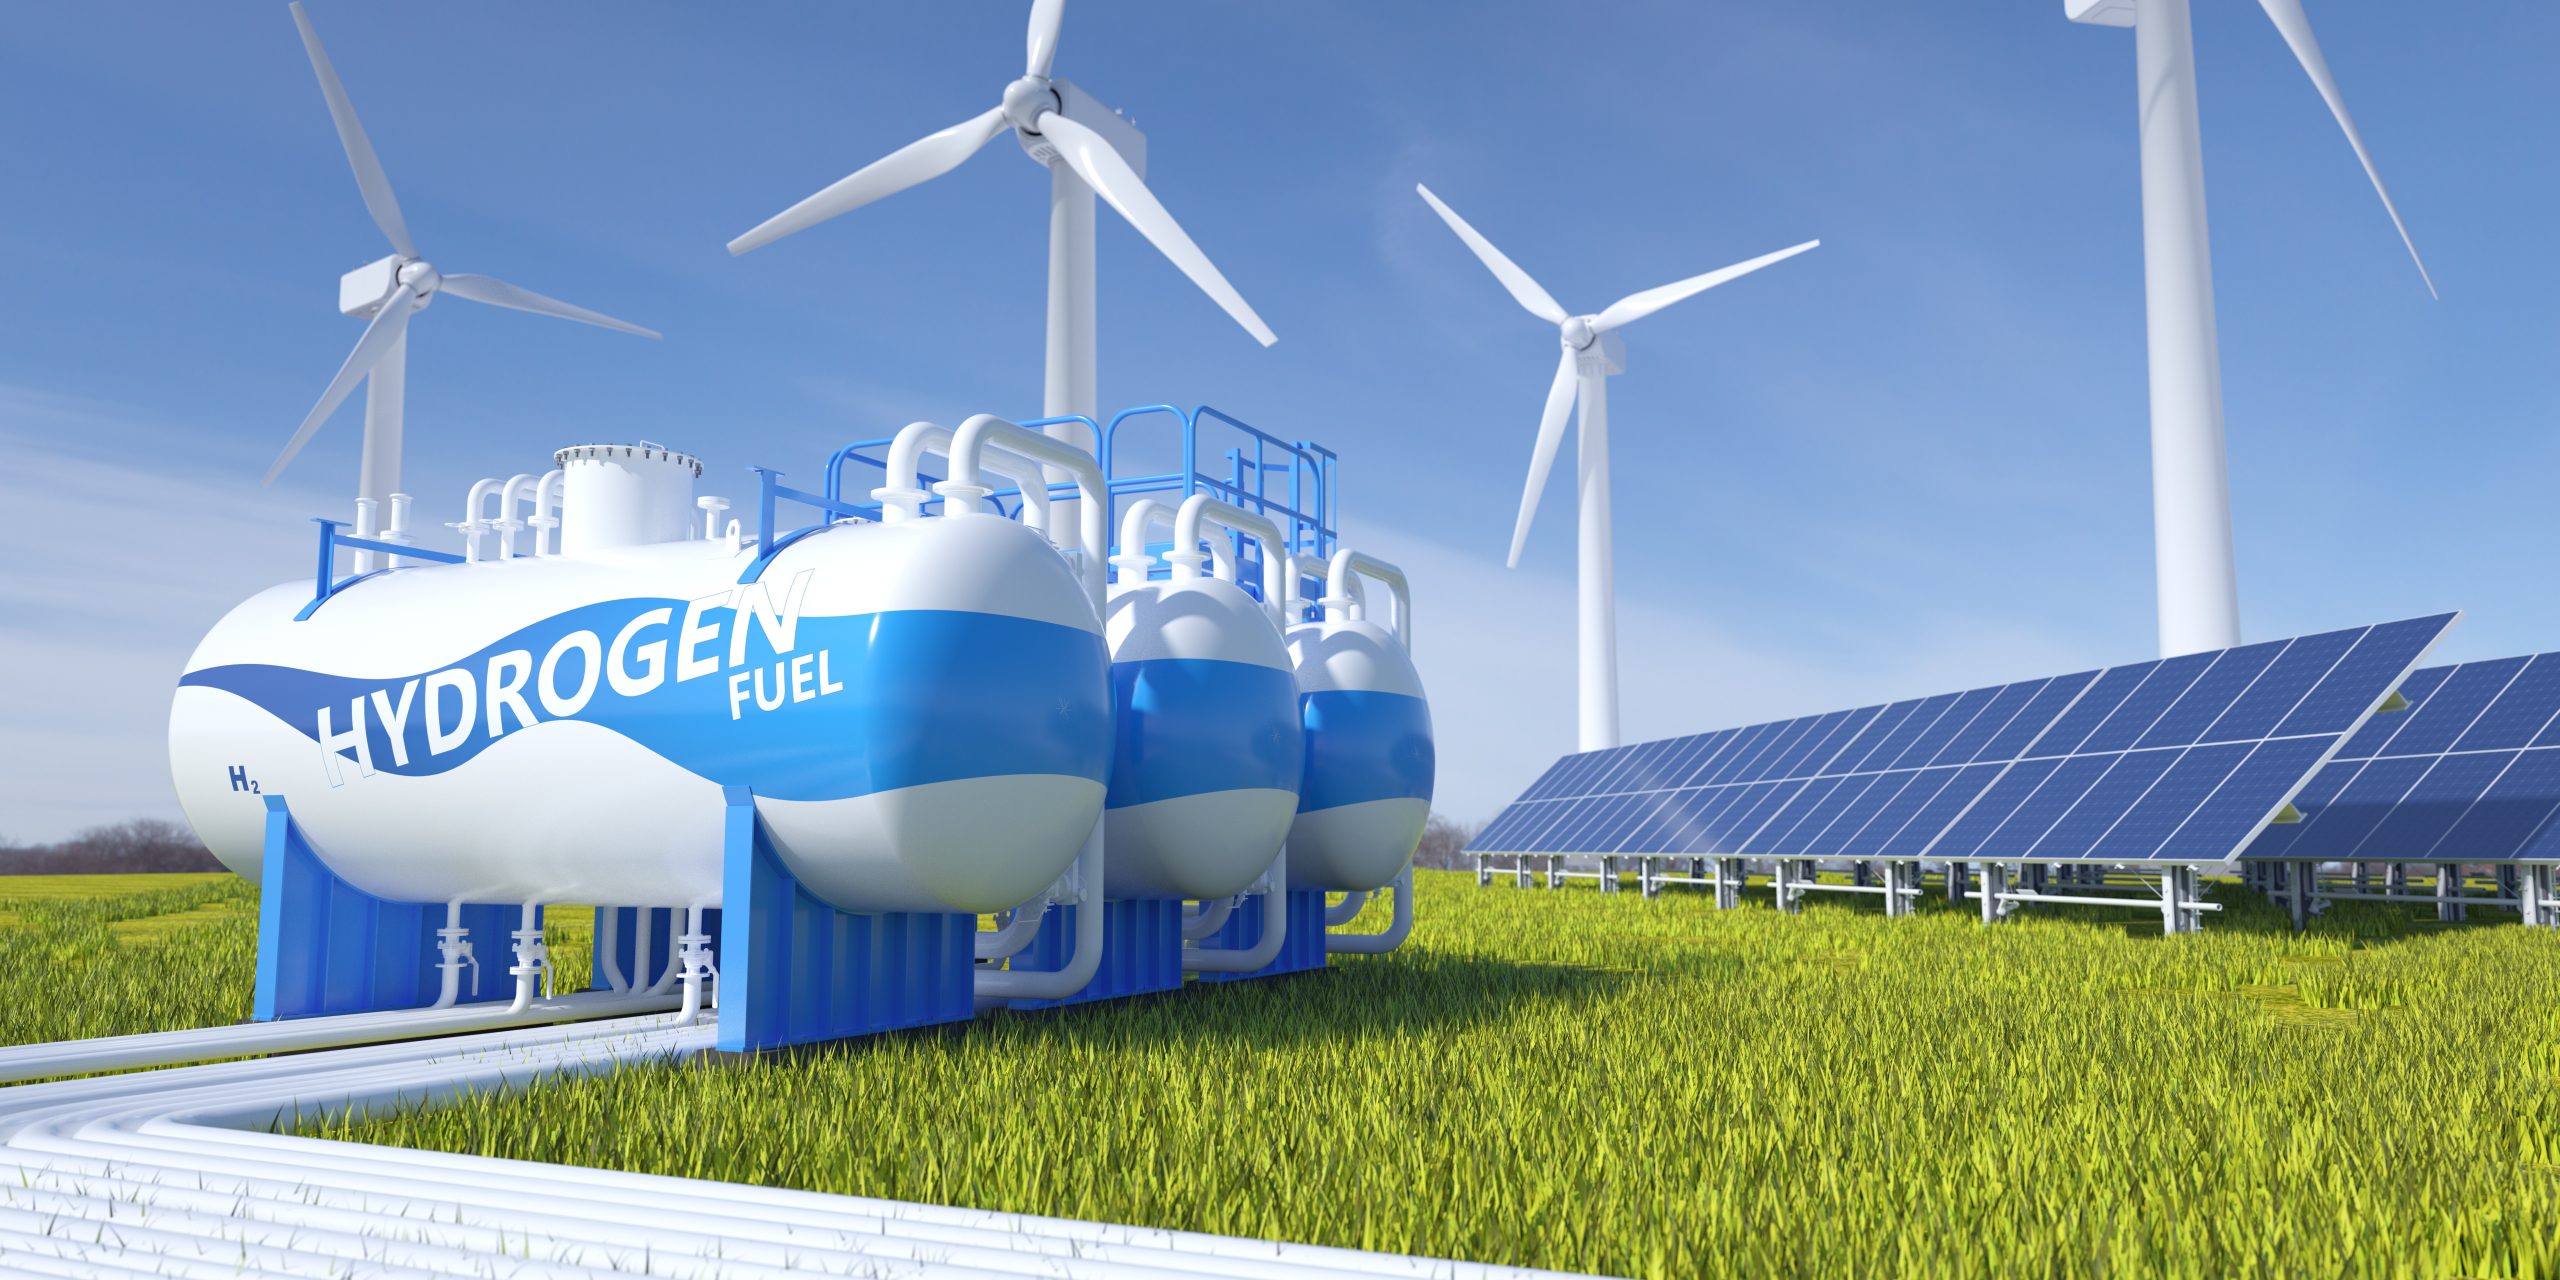 Win £30K in the C-DICE sandpit exploring the role of hydrogen in energy systems